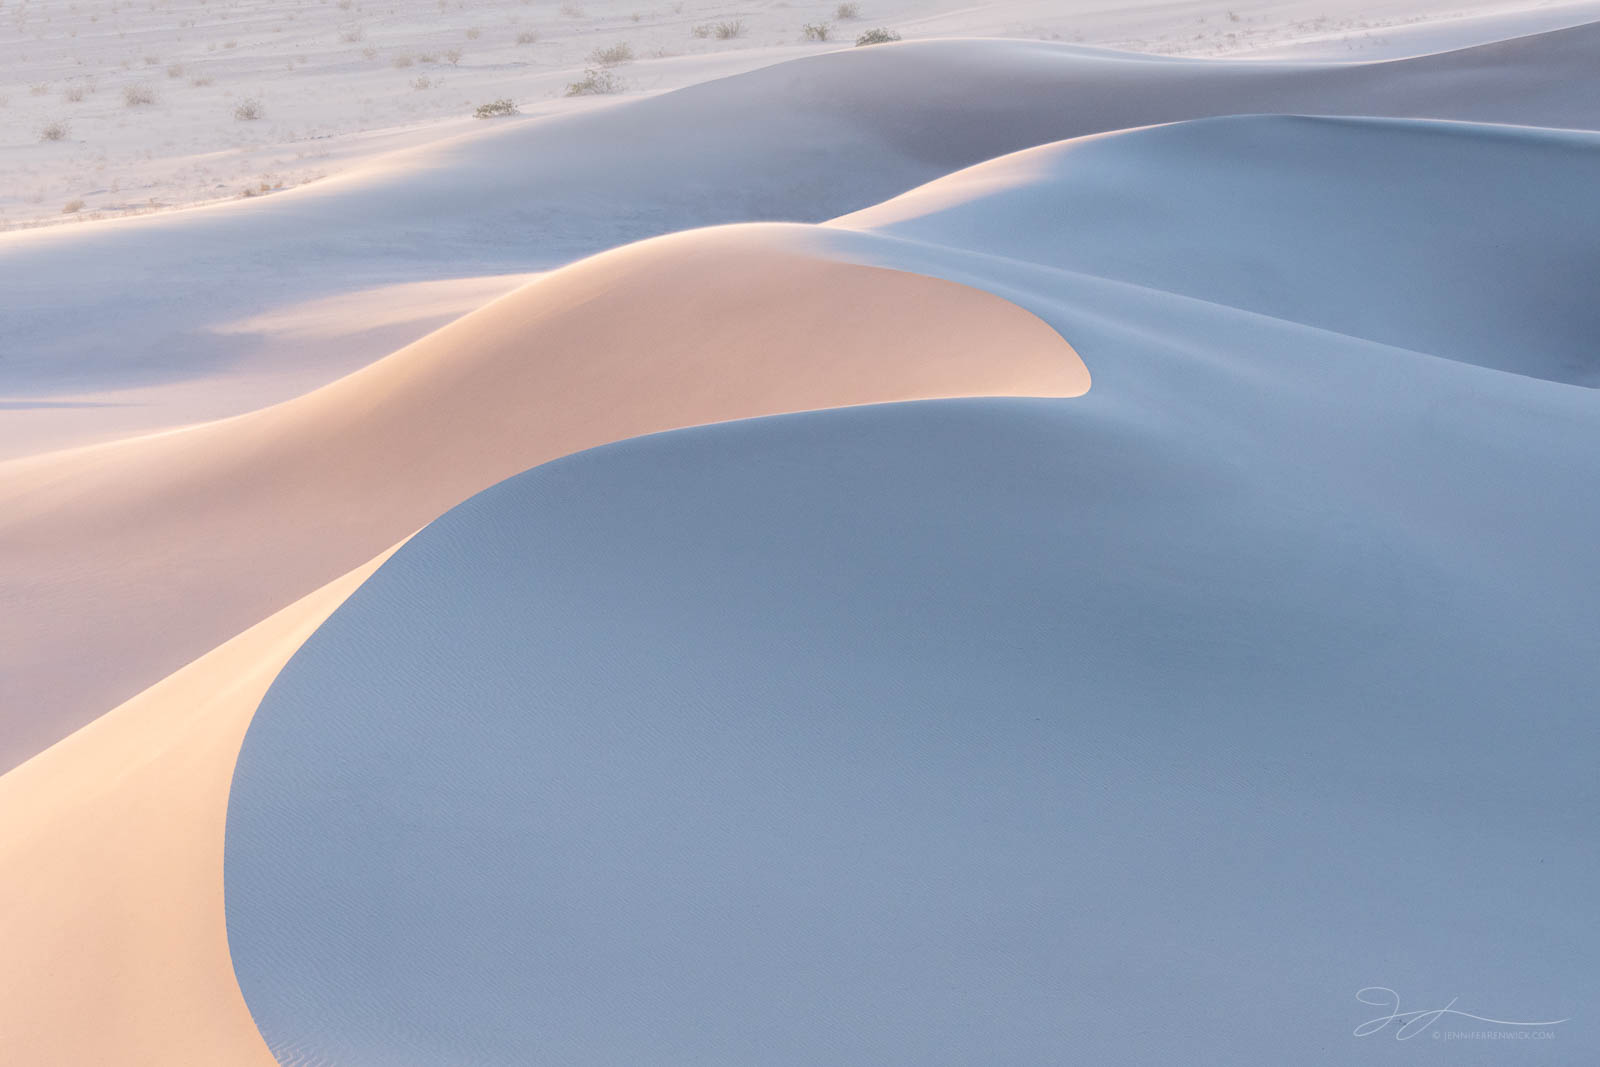 Sand dunes blush with the last light just after sunset.